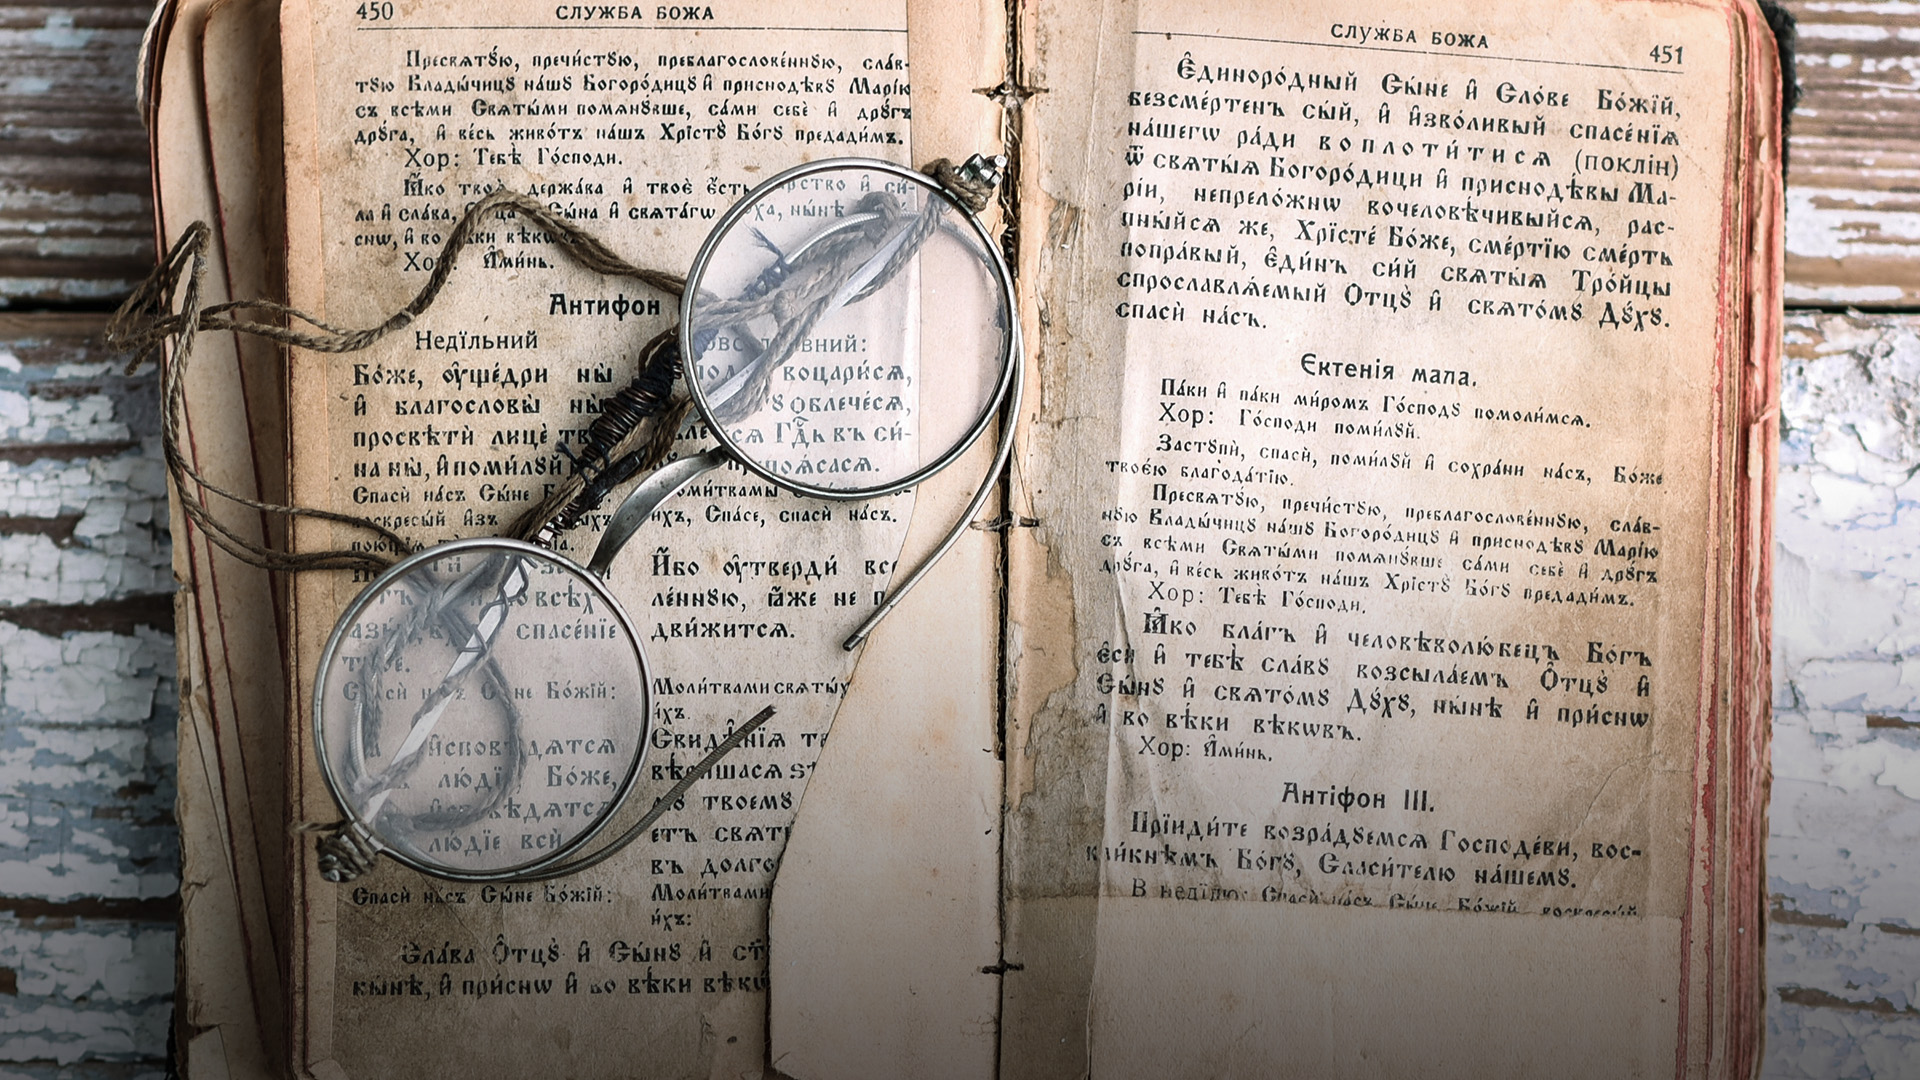 broken glasses and ancient prayer book with slavic text